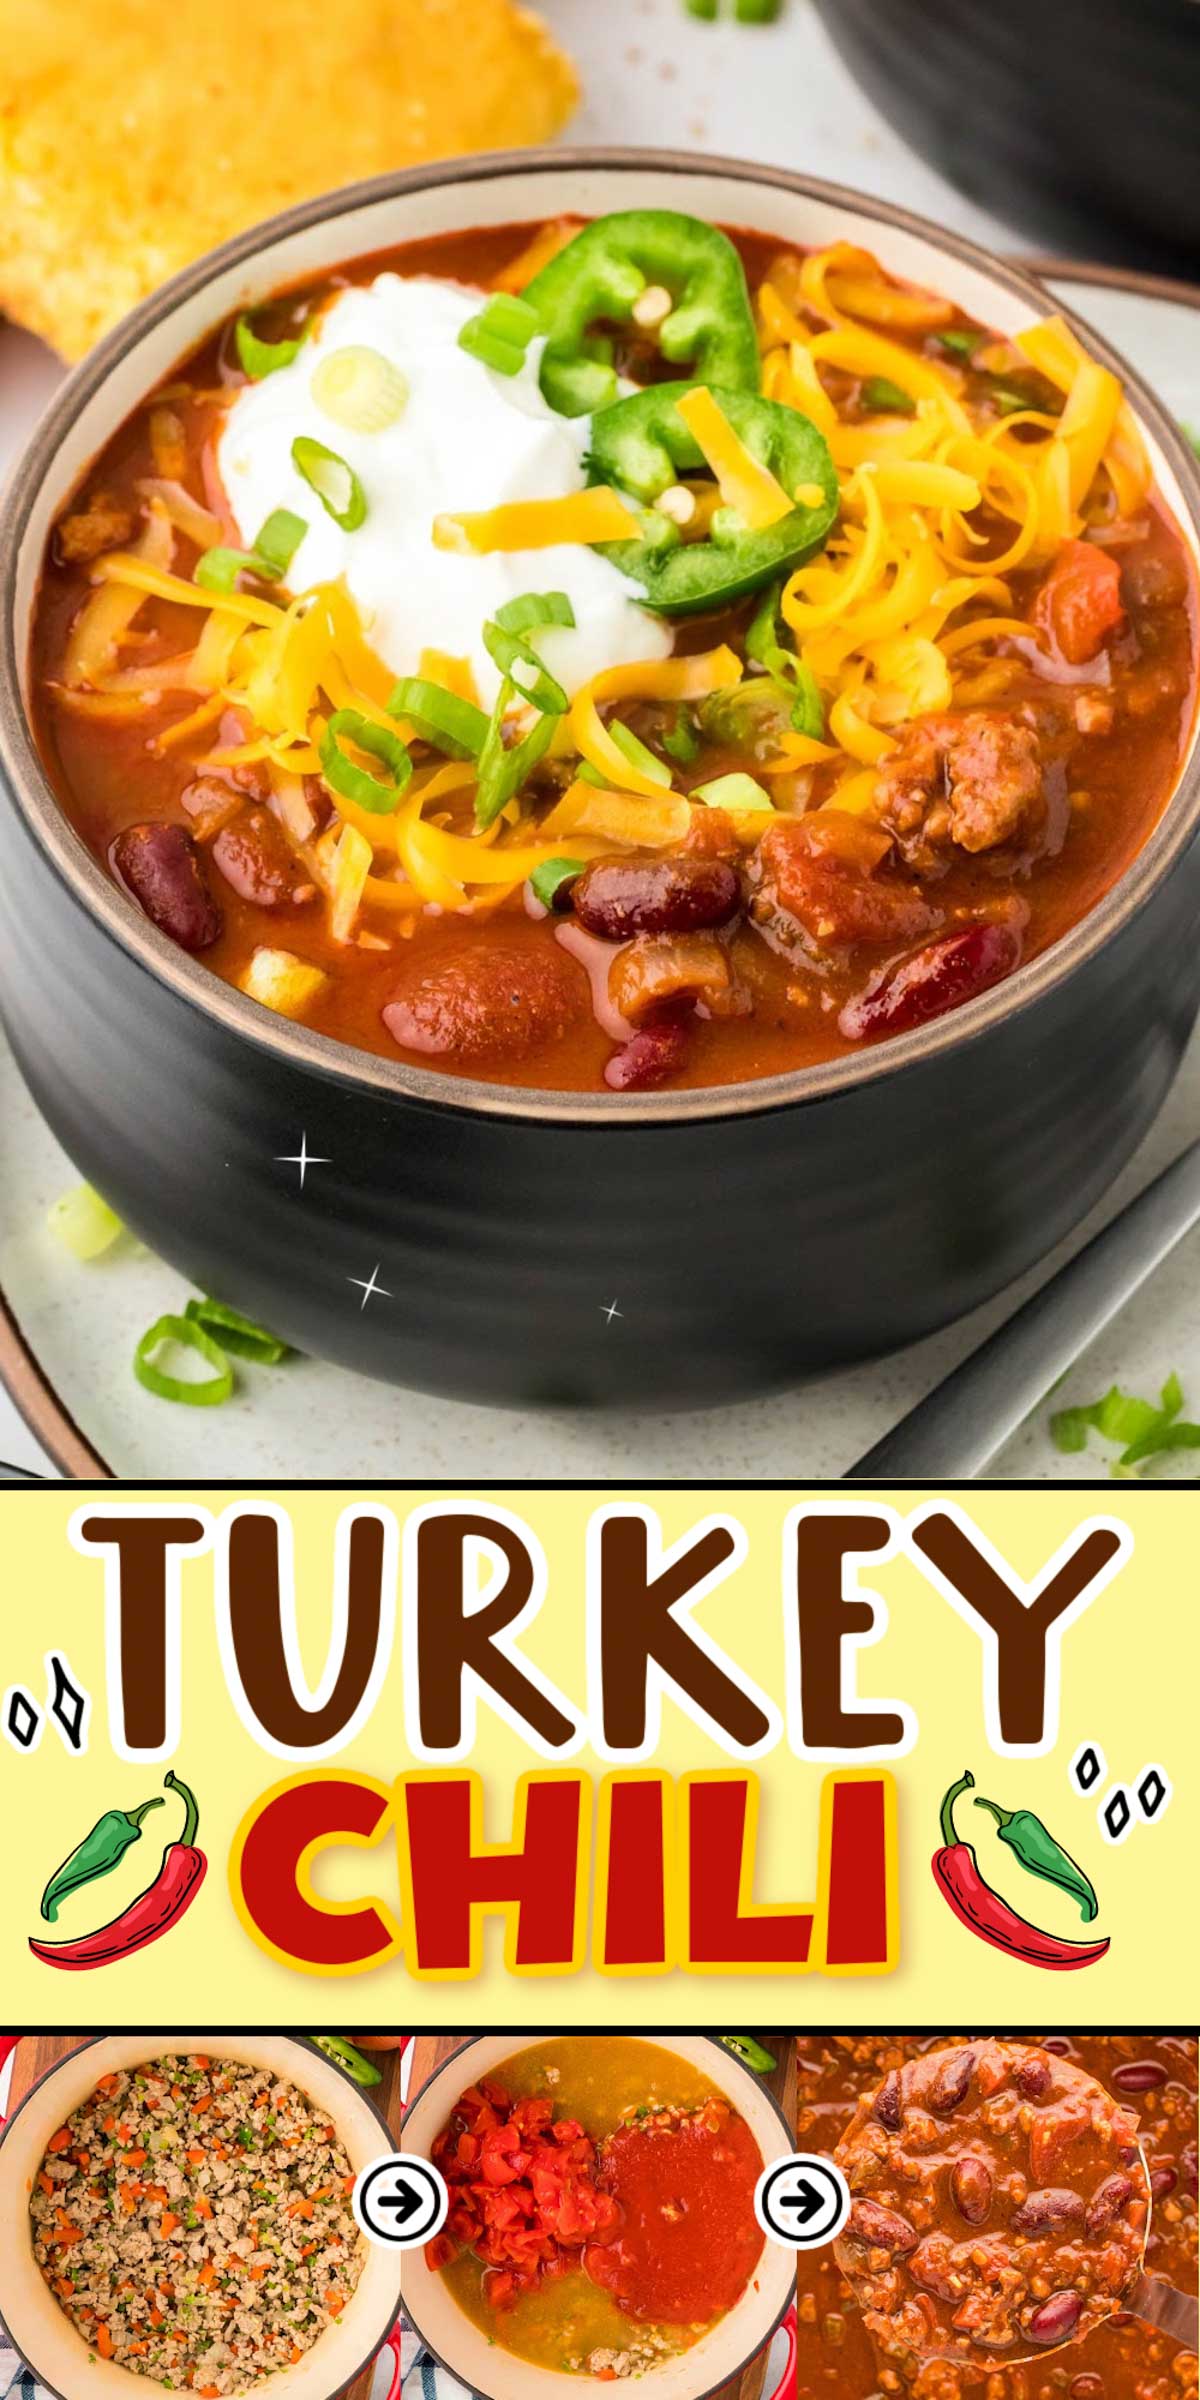 This easy Turkey Chili comes together in just 1 hour with lean ground turkey, beans, and veggies, and a SECRET INGREDIENT that enhances the flavors in this delicious dish that's perfect for dinner and game days. via @sugarandsoulco